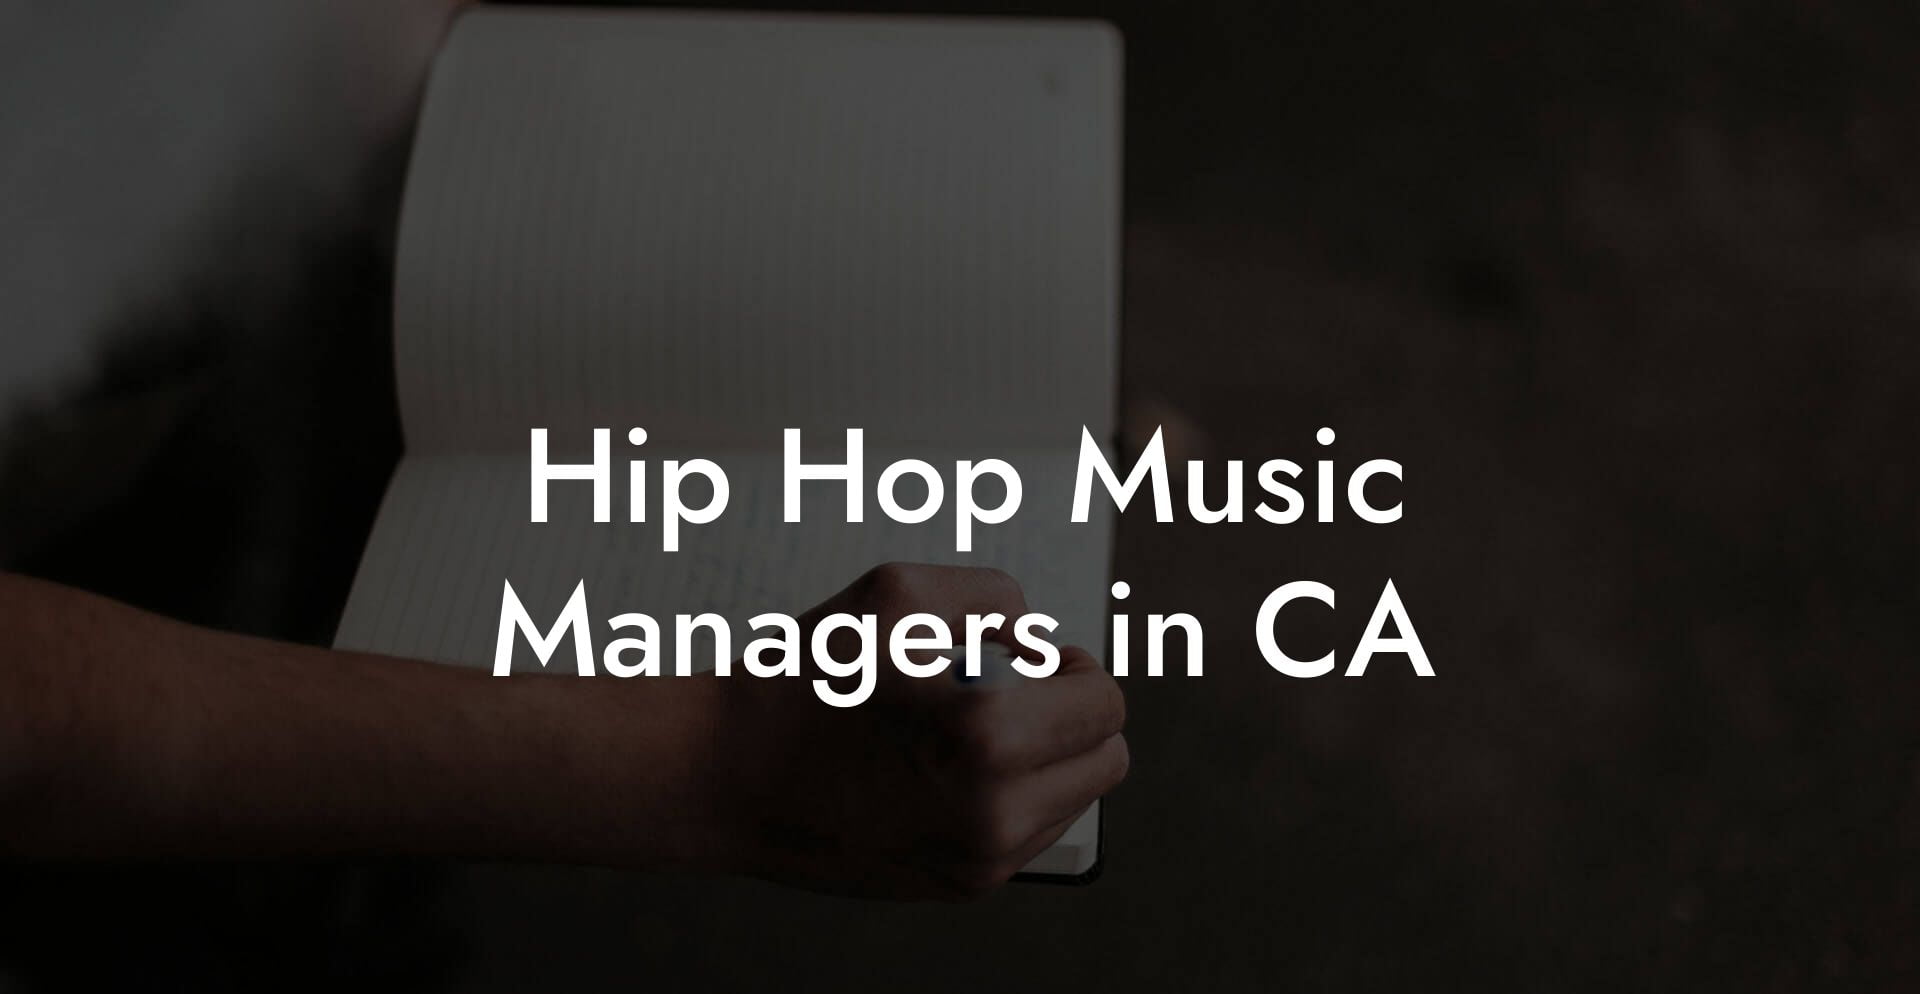 Hip Hop Music Managers in CA